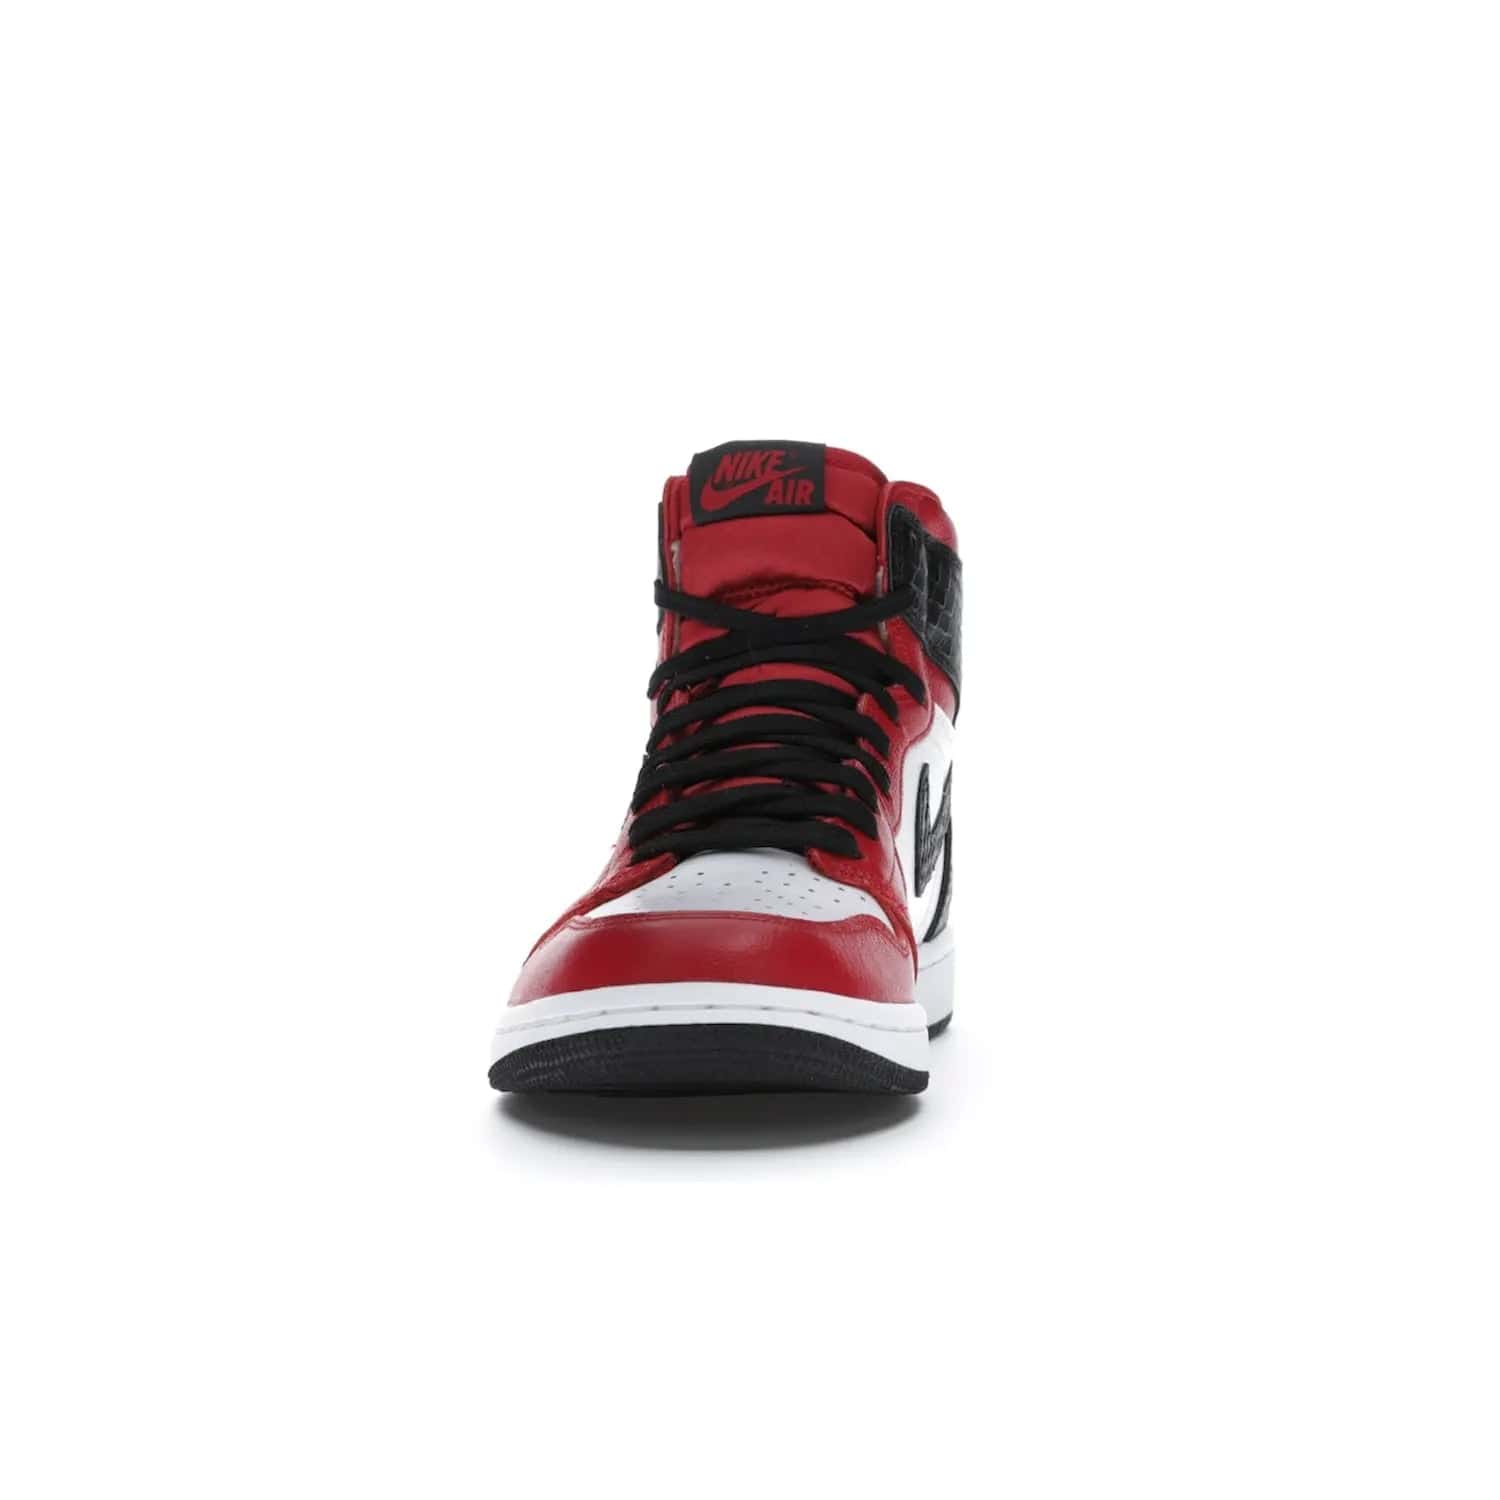 Jordan 1 Retro High Satin Snake Chicago (Women's) - Image 11 - Only at www.BallersClubKickz.com - Upscale Jordan 1 Retro High Satin Snake Chicago (Women's). Crafted from red and white leather with faux snakeskin details and red satin. Jordan Wings graphic on the ankle, white midsole, and striking red outsole. August 2020 release. Iconic shoes must-have for sneaker collectors.